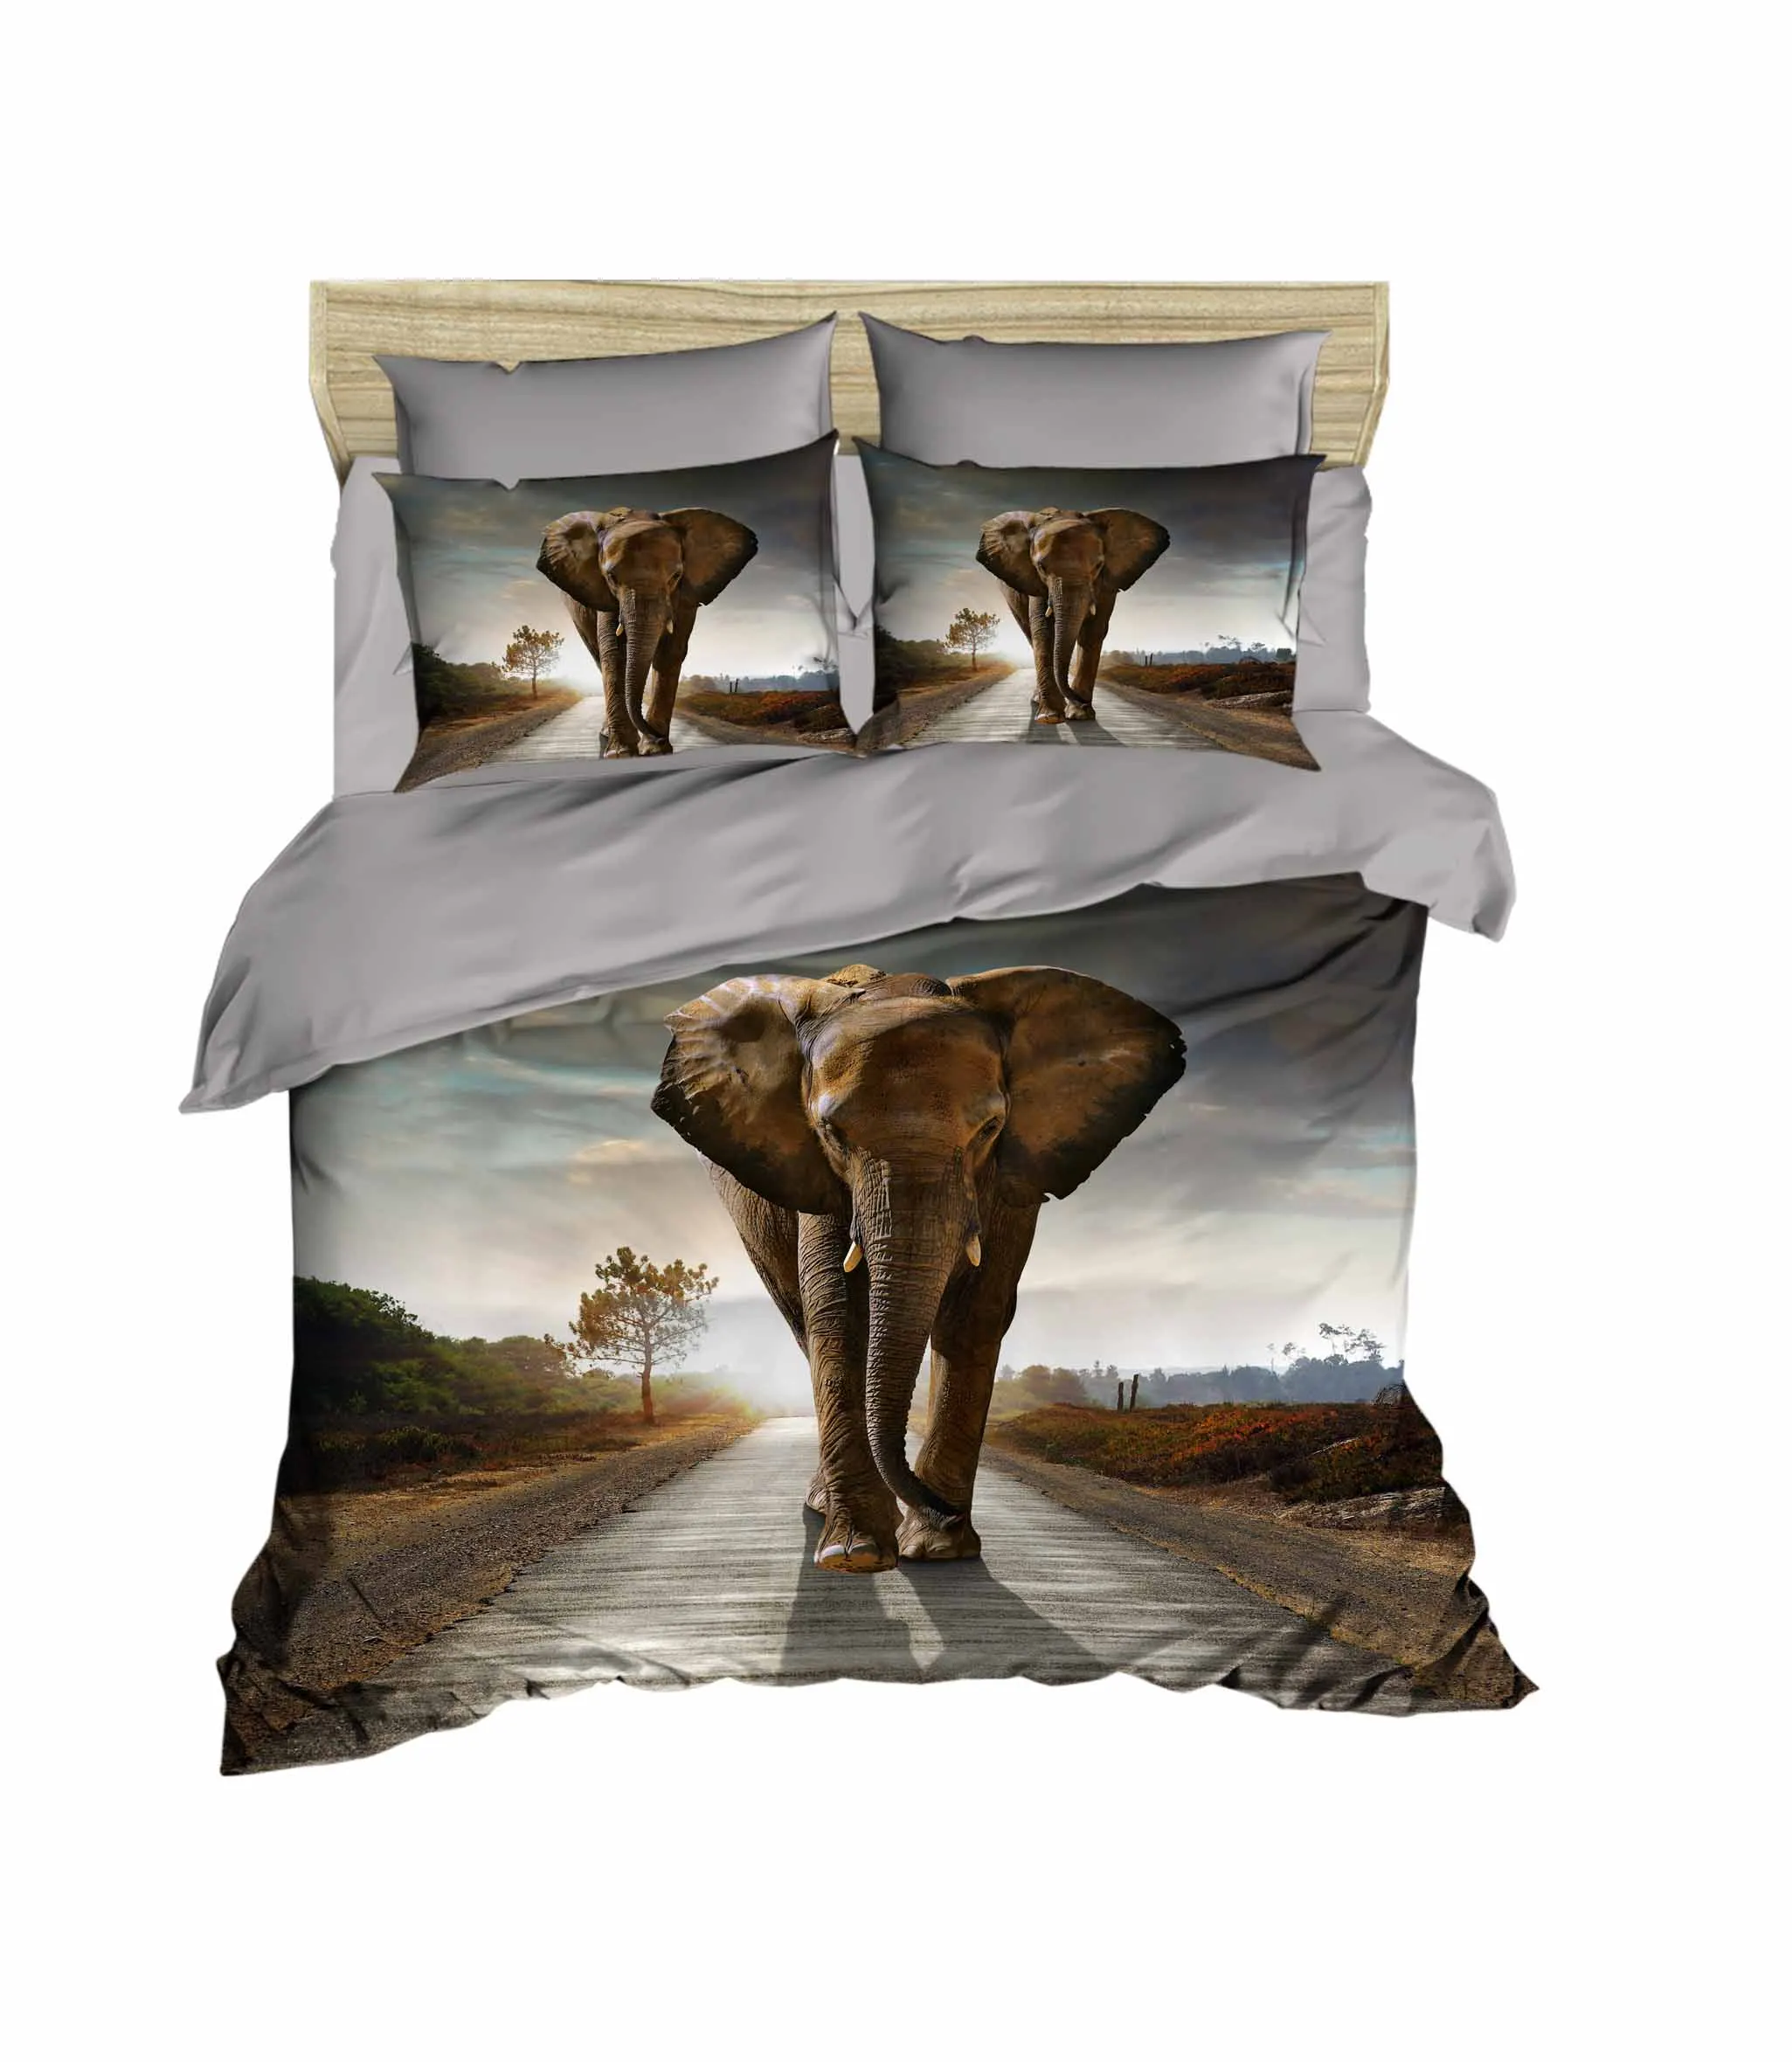 

100% Turkish Cotton Elephant Themed 3D Printed Duvet Cover Set, All Sizes, Made in Turkey